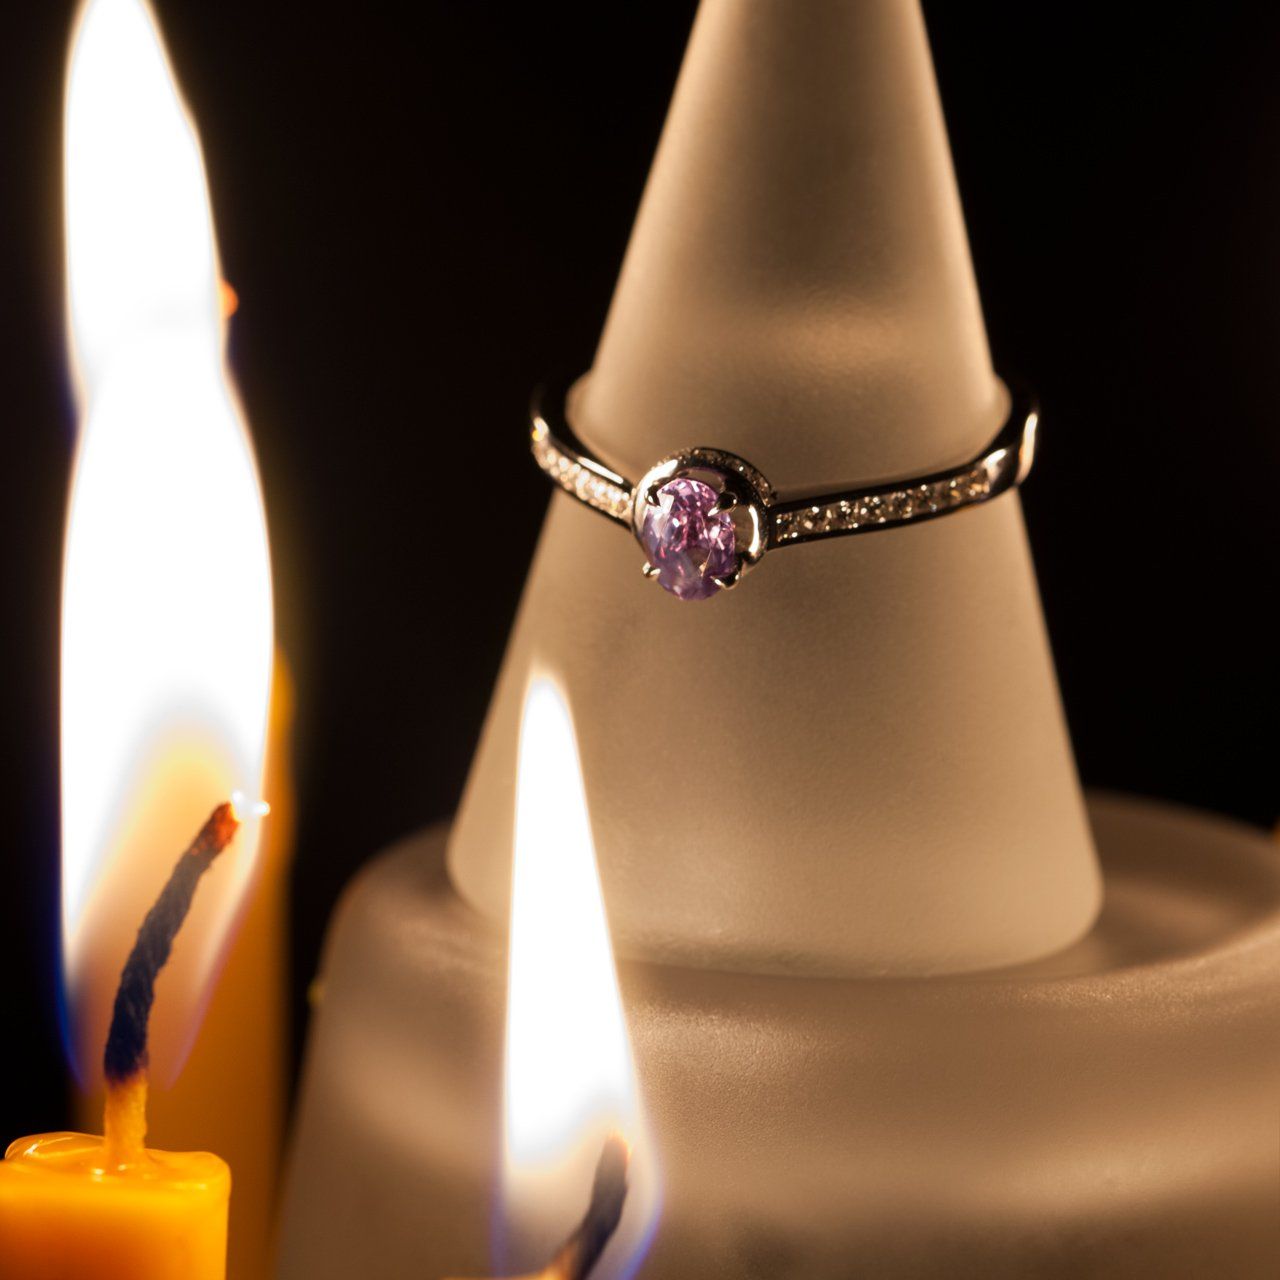 0.55ct alexandrite ring in 18k white gold resting atop a candle for display